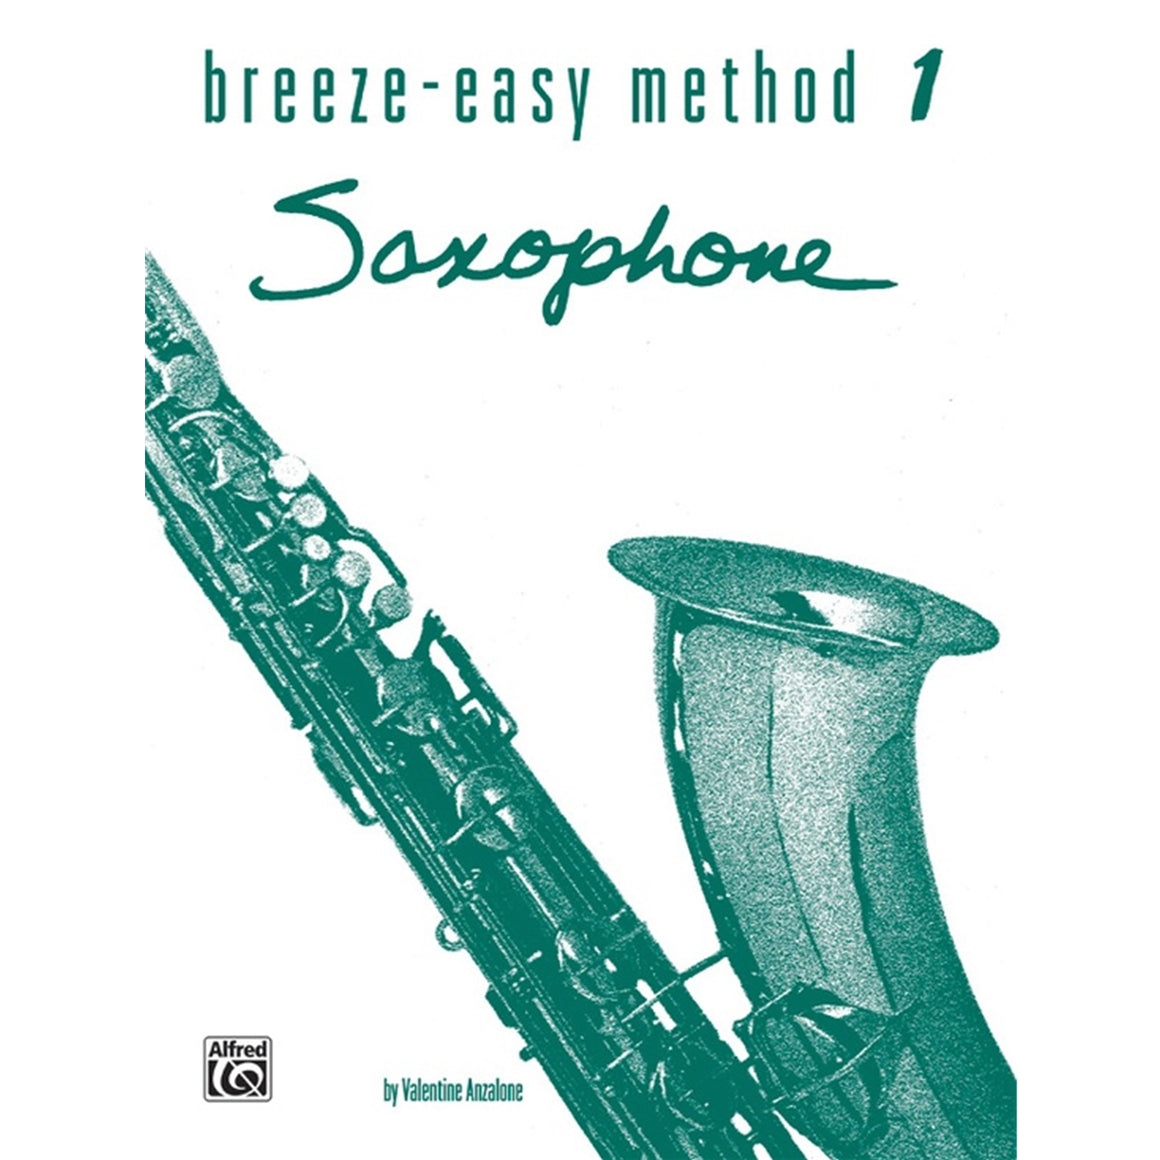 ALFRED 00BE0015 Breeze-Easy Method for Saxophone, Book I